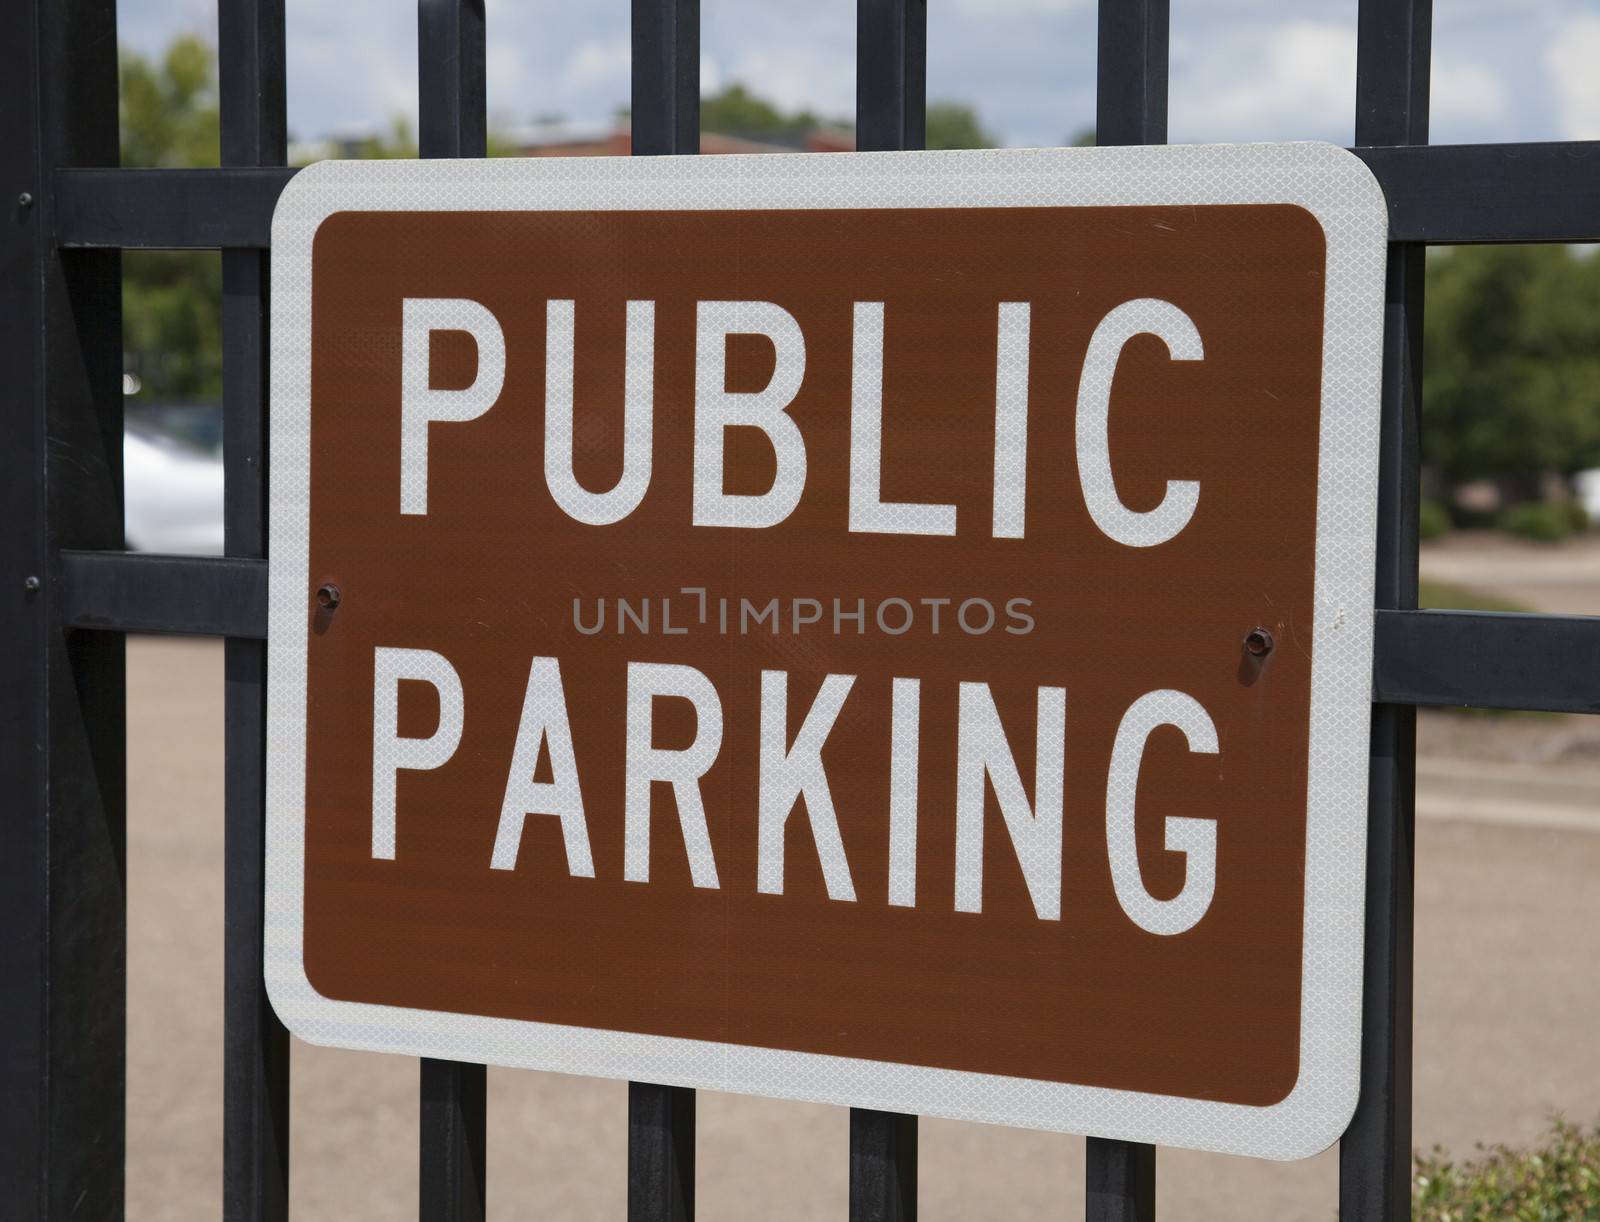 Brown public parking sign with white letters